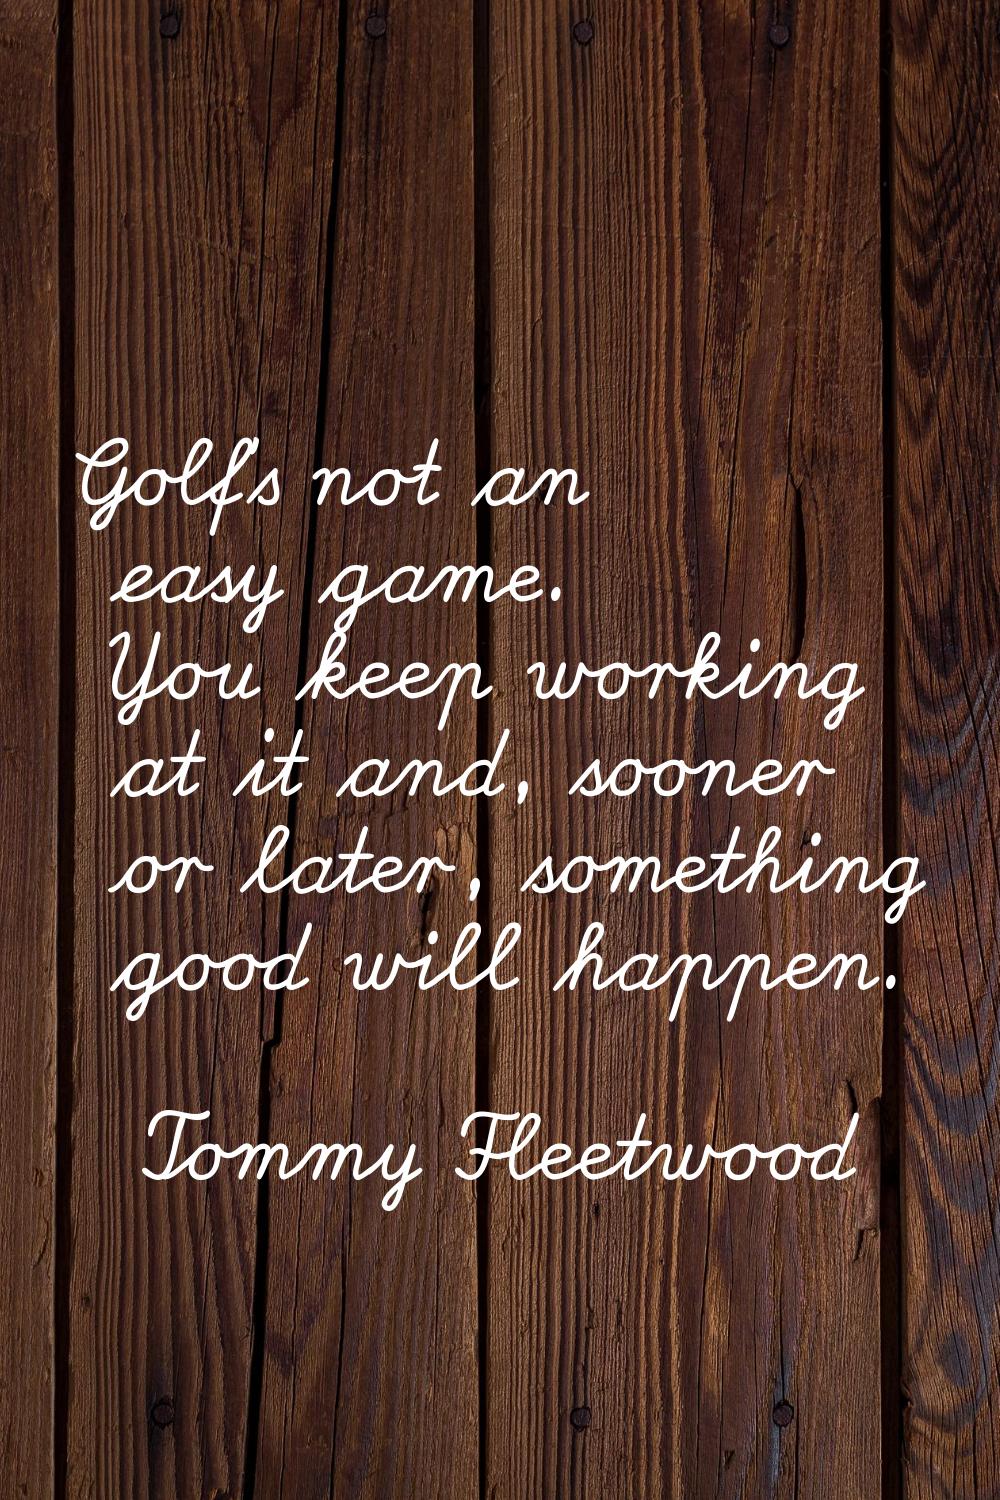 Golf's not an easy game. You keep working at it and, sooner or later, something good will happen.